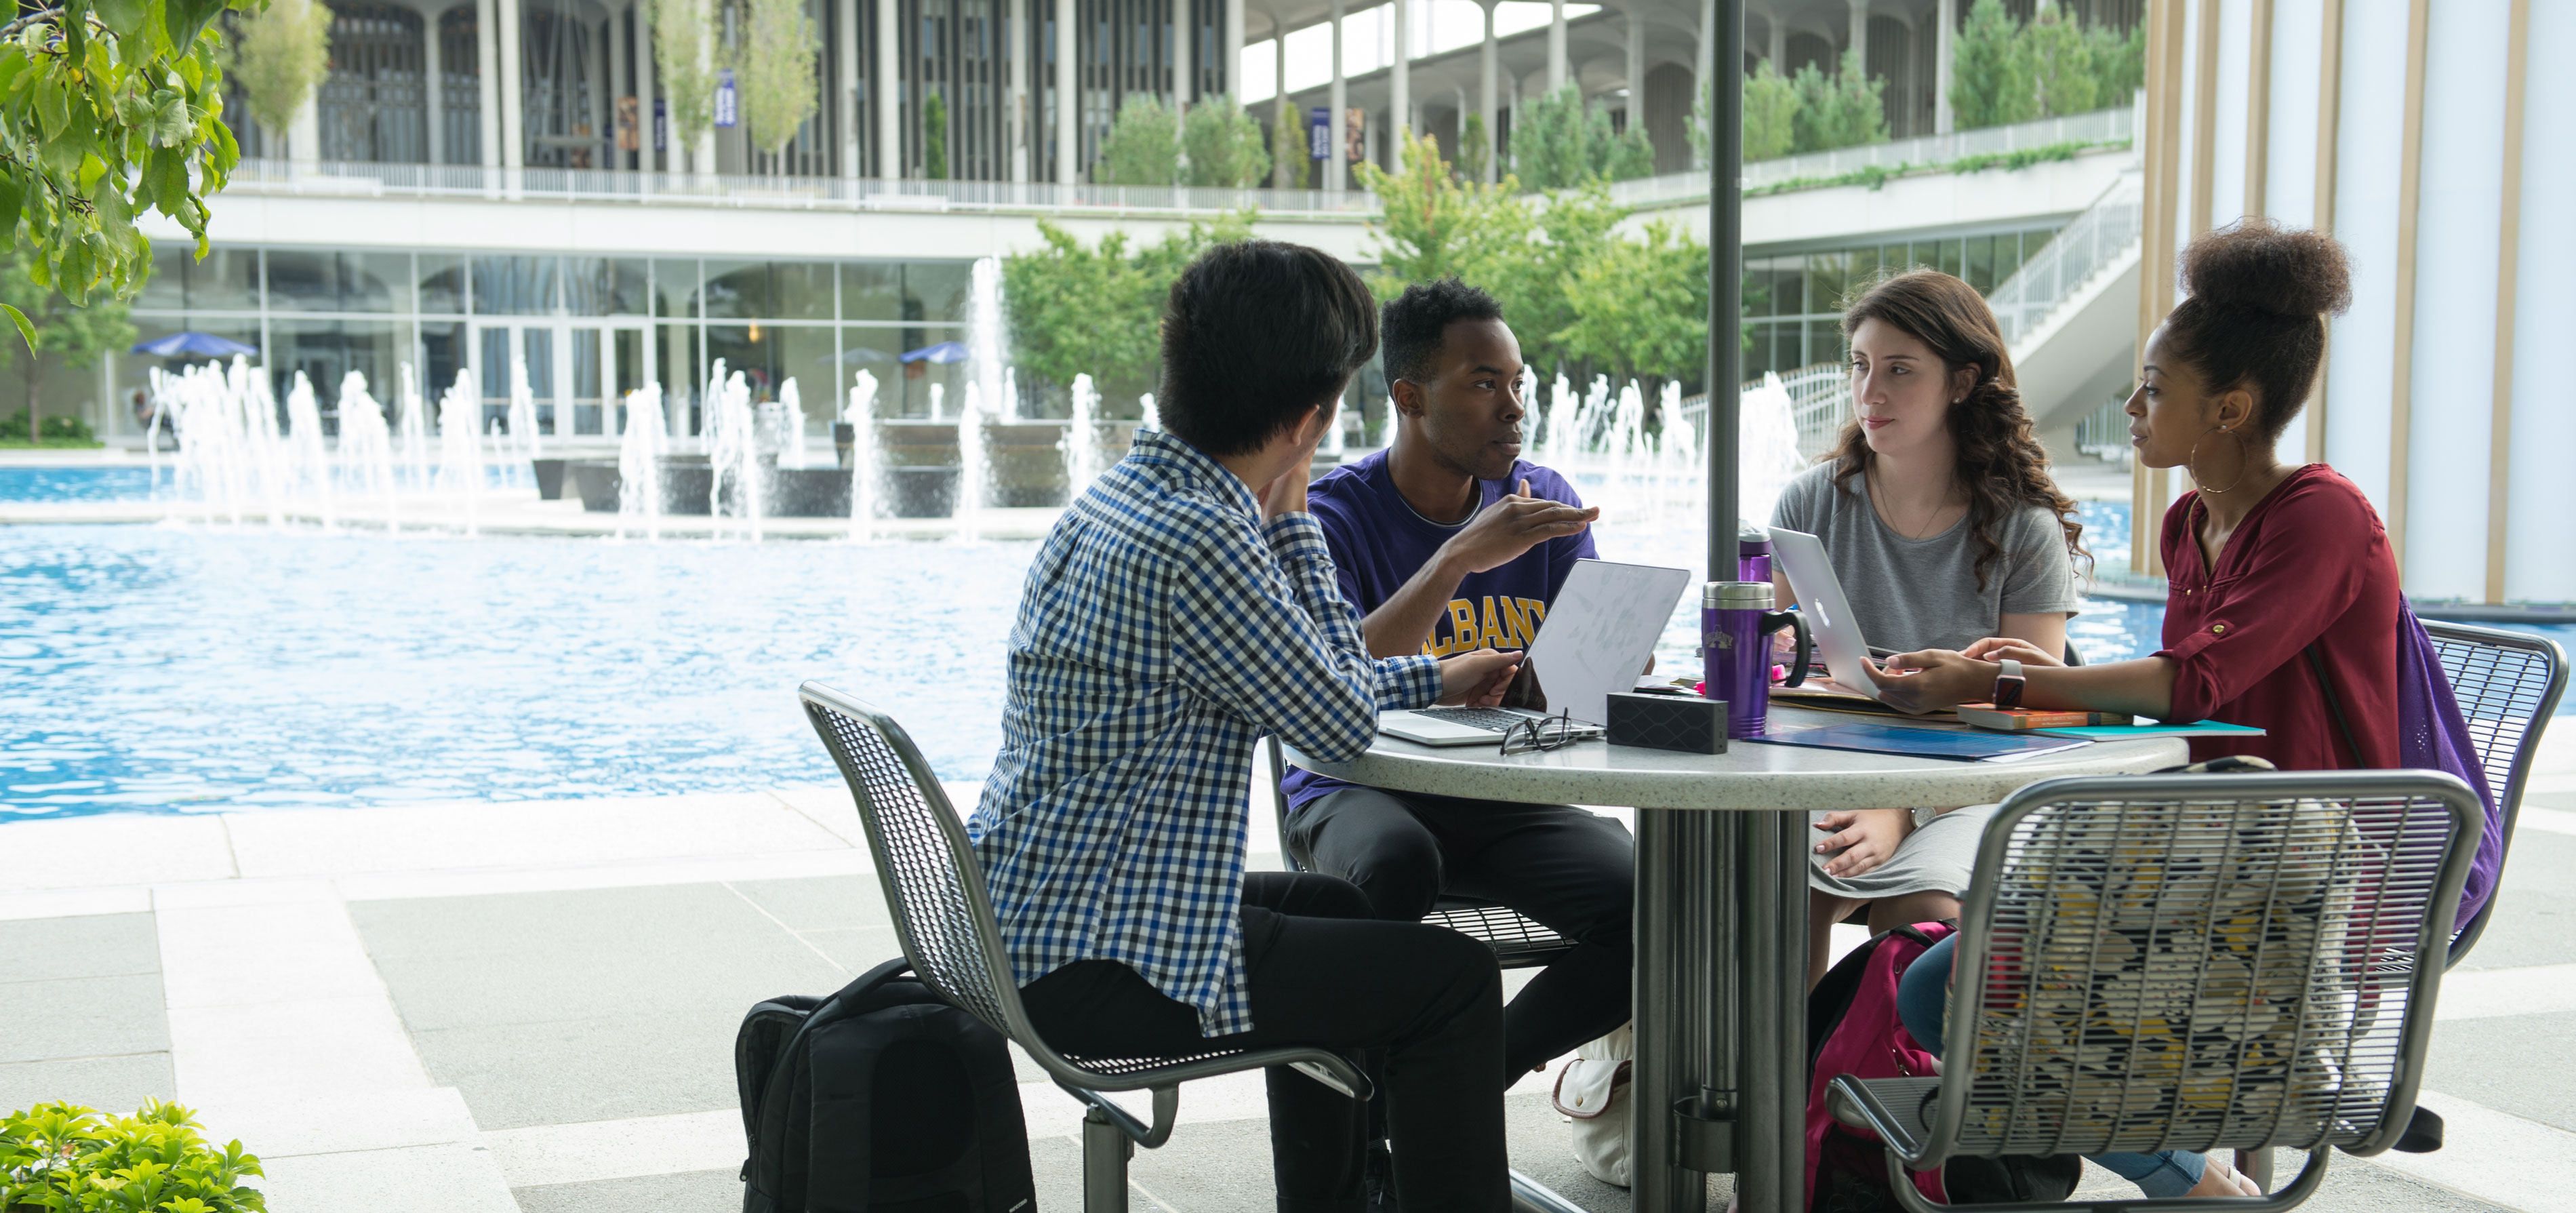 Four students sit at a table next to an outdoor fountain, with laptops and computers open in front of them as they converse.